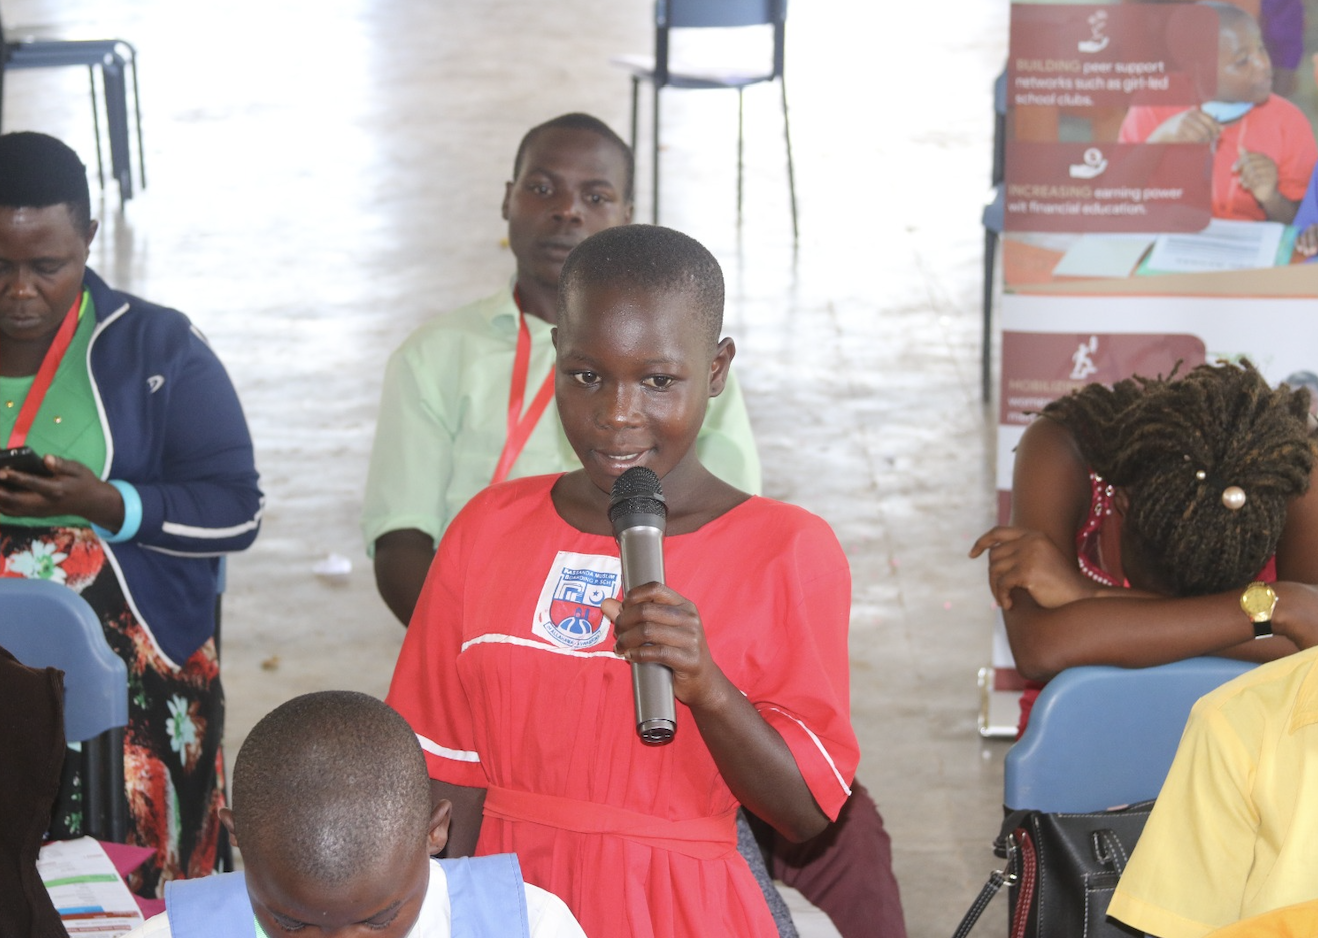 World Health Day Insights: Asante Africa’s Impact on Health Education